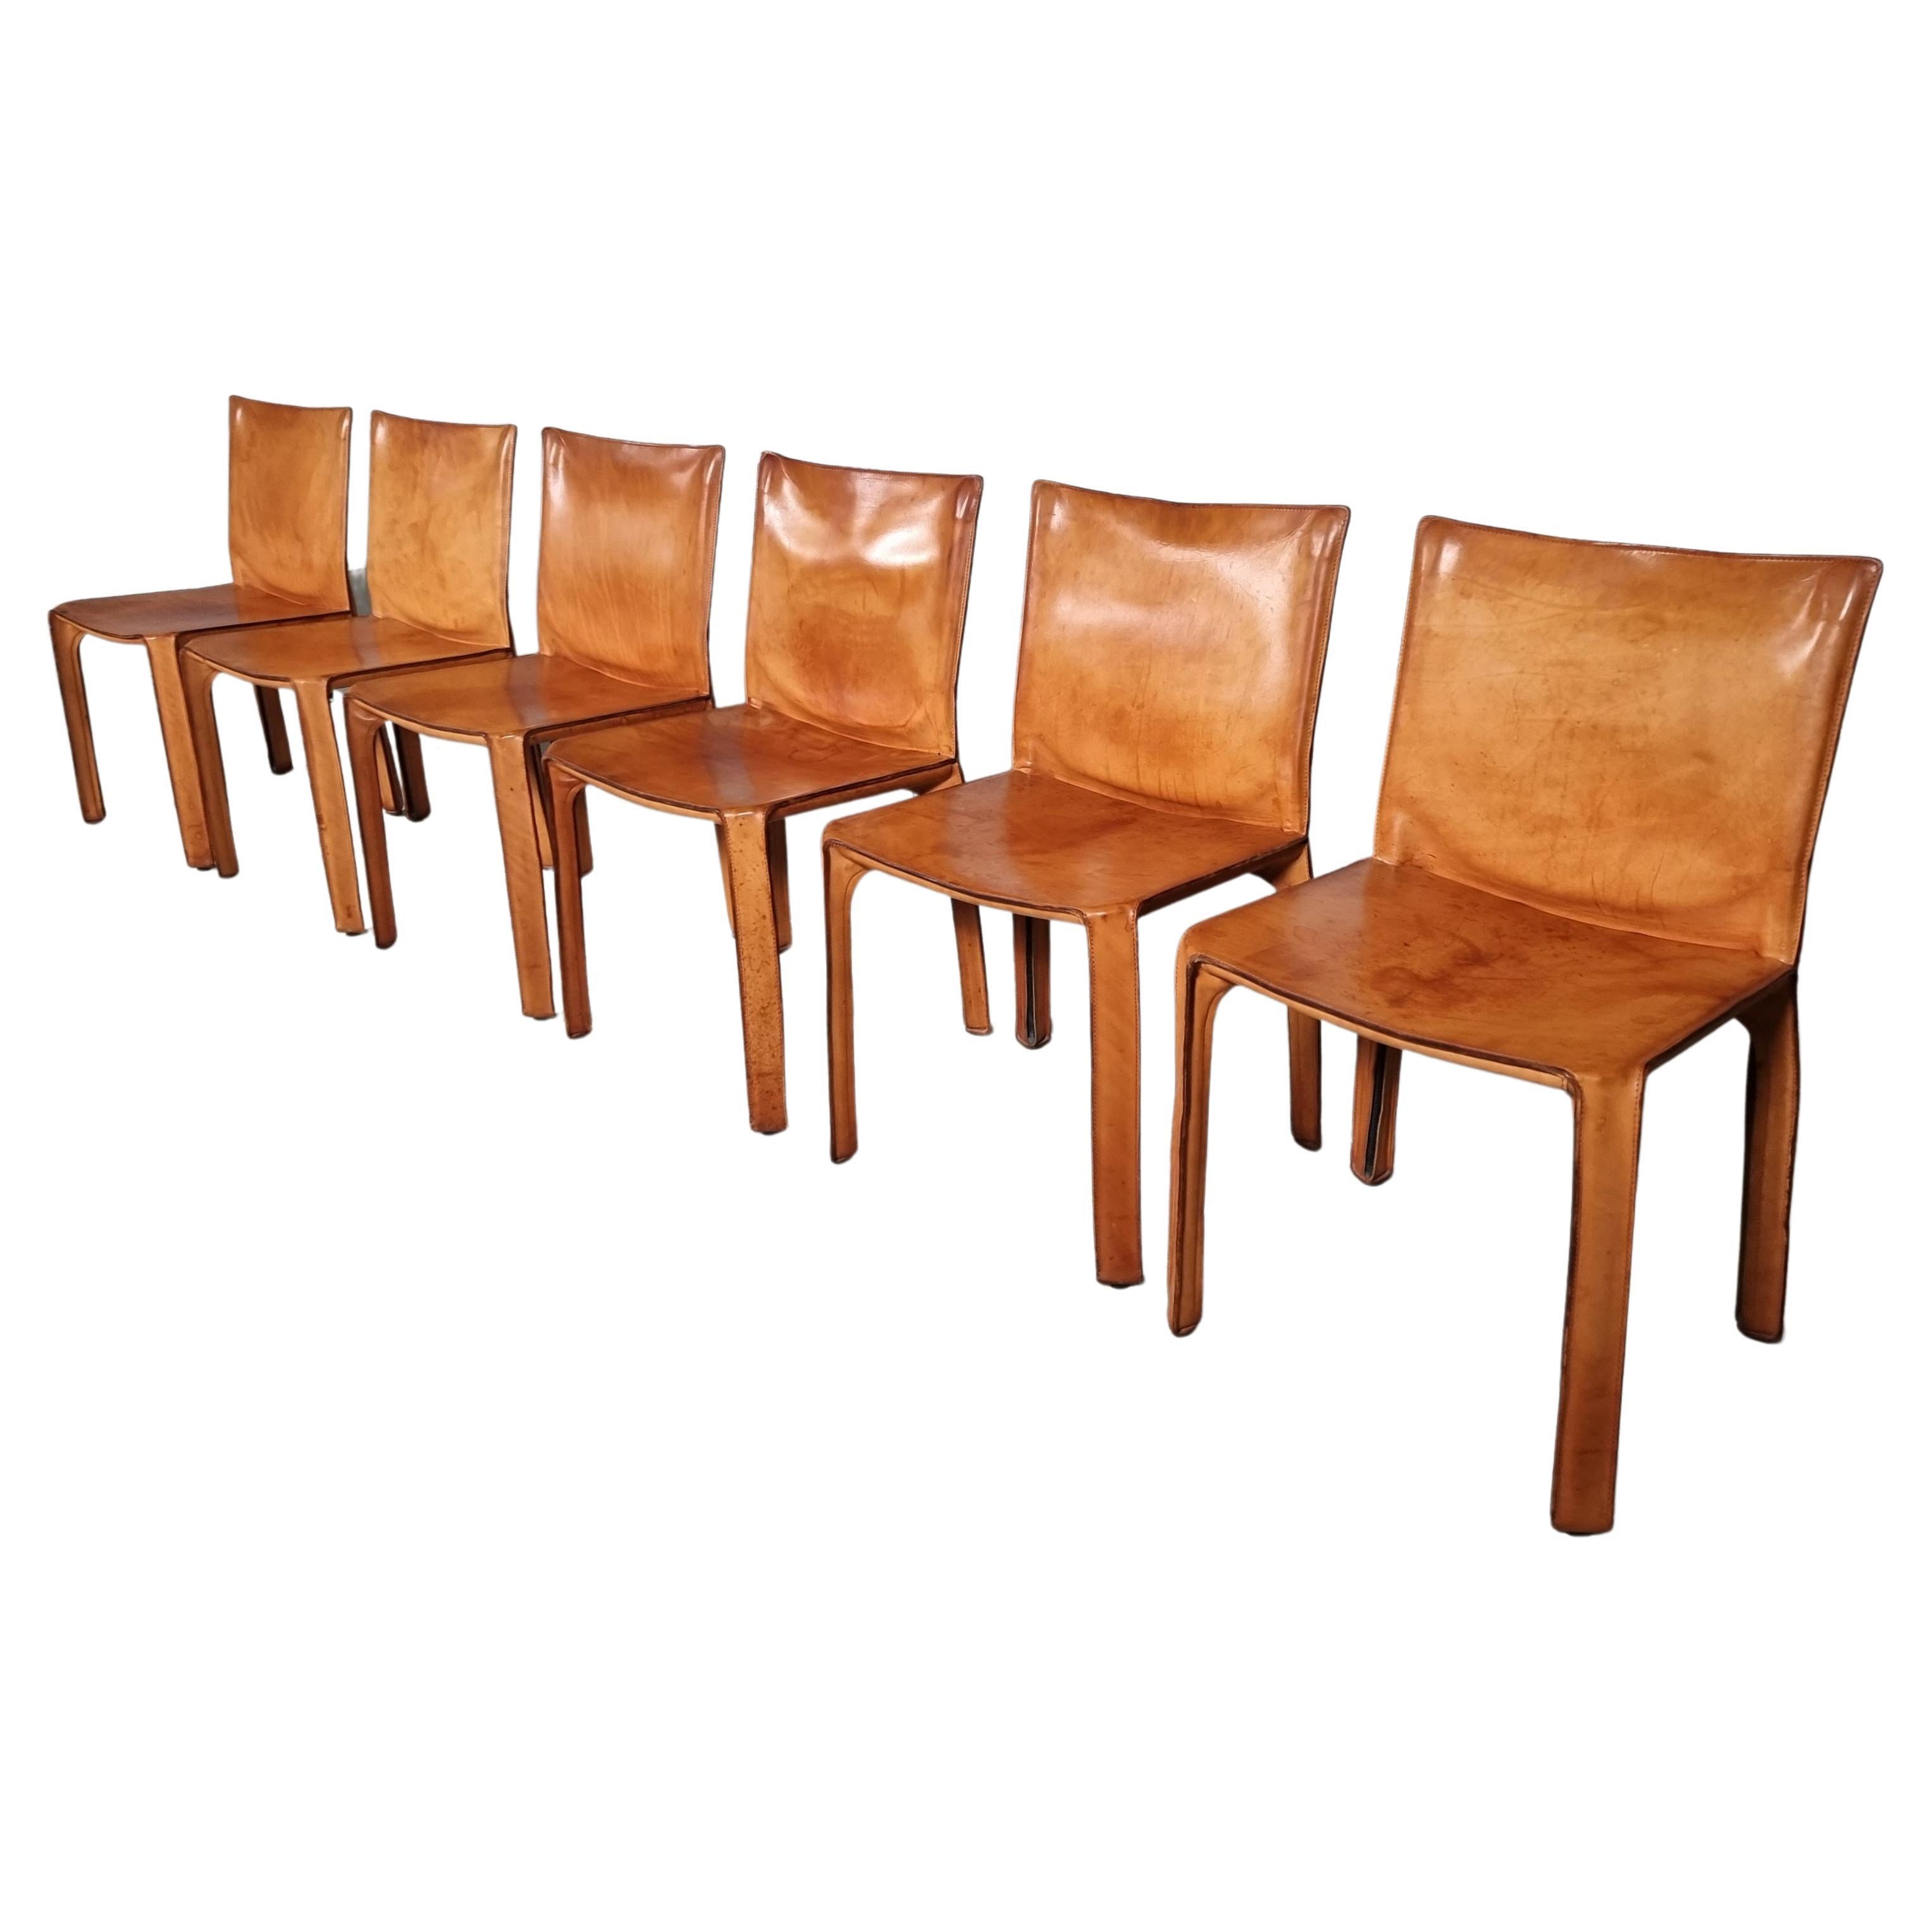 Set of 6 CAB 412 Chairs by Mario Bellini for Cassina, 1970s